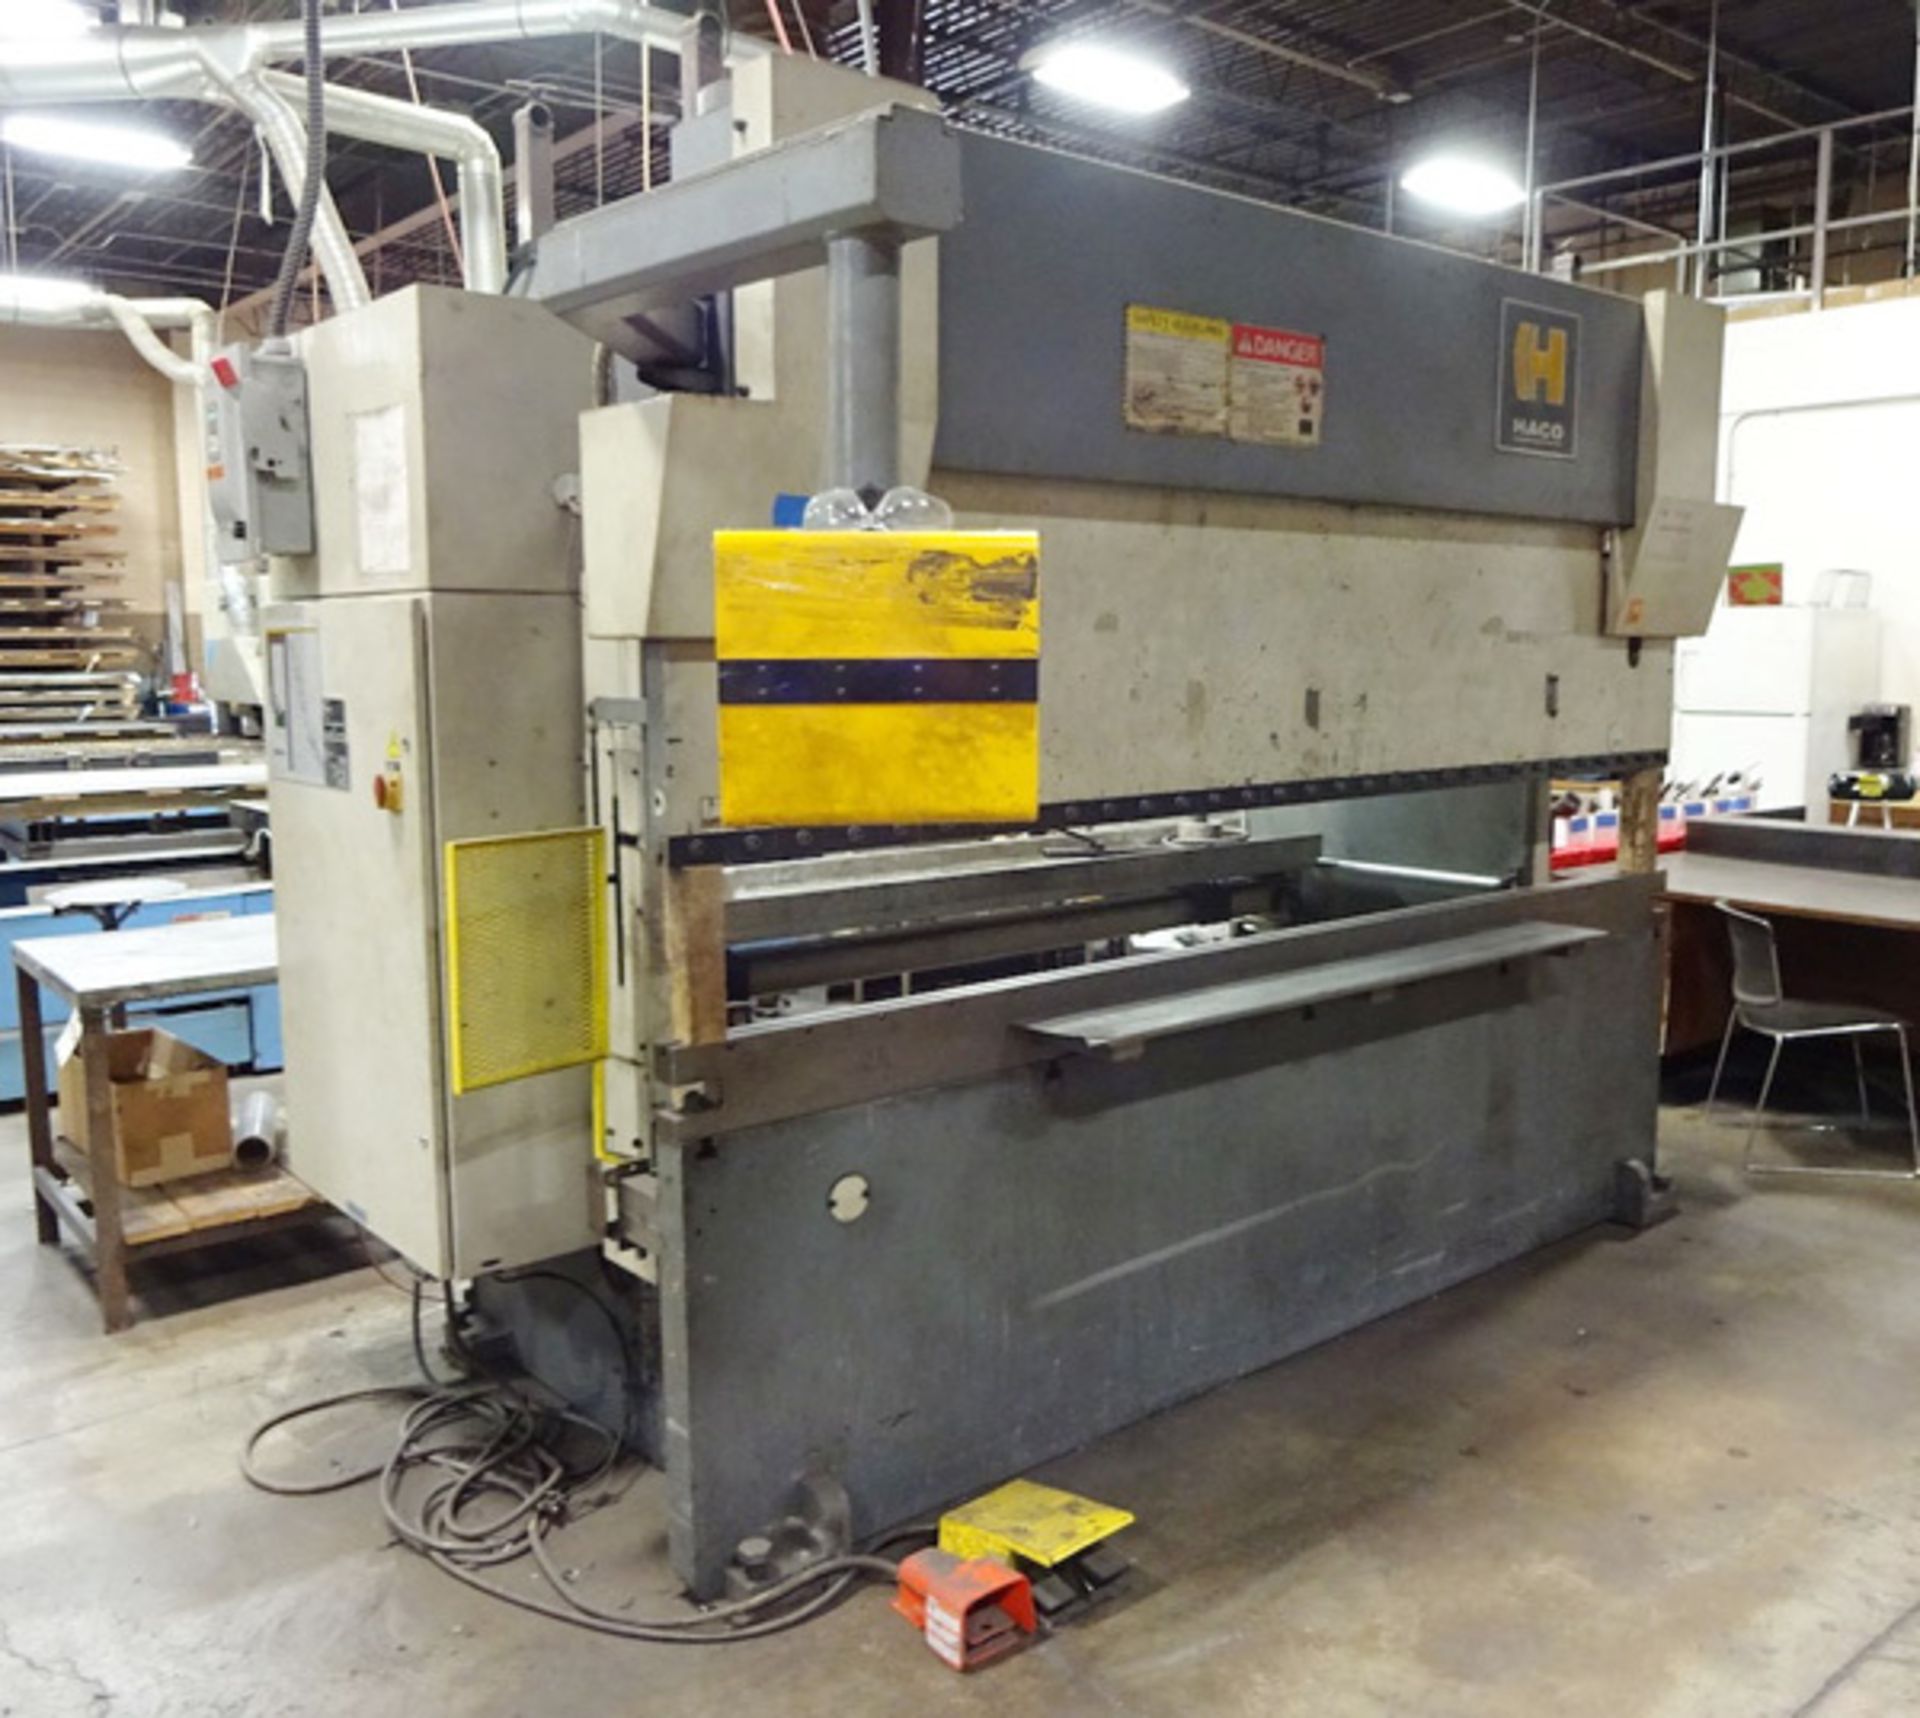 Haco Atlantic CNC Hydraulic Press Brake 120 Ton x 10', Located In Painesville, OH - 8615P - Image 2 of 14